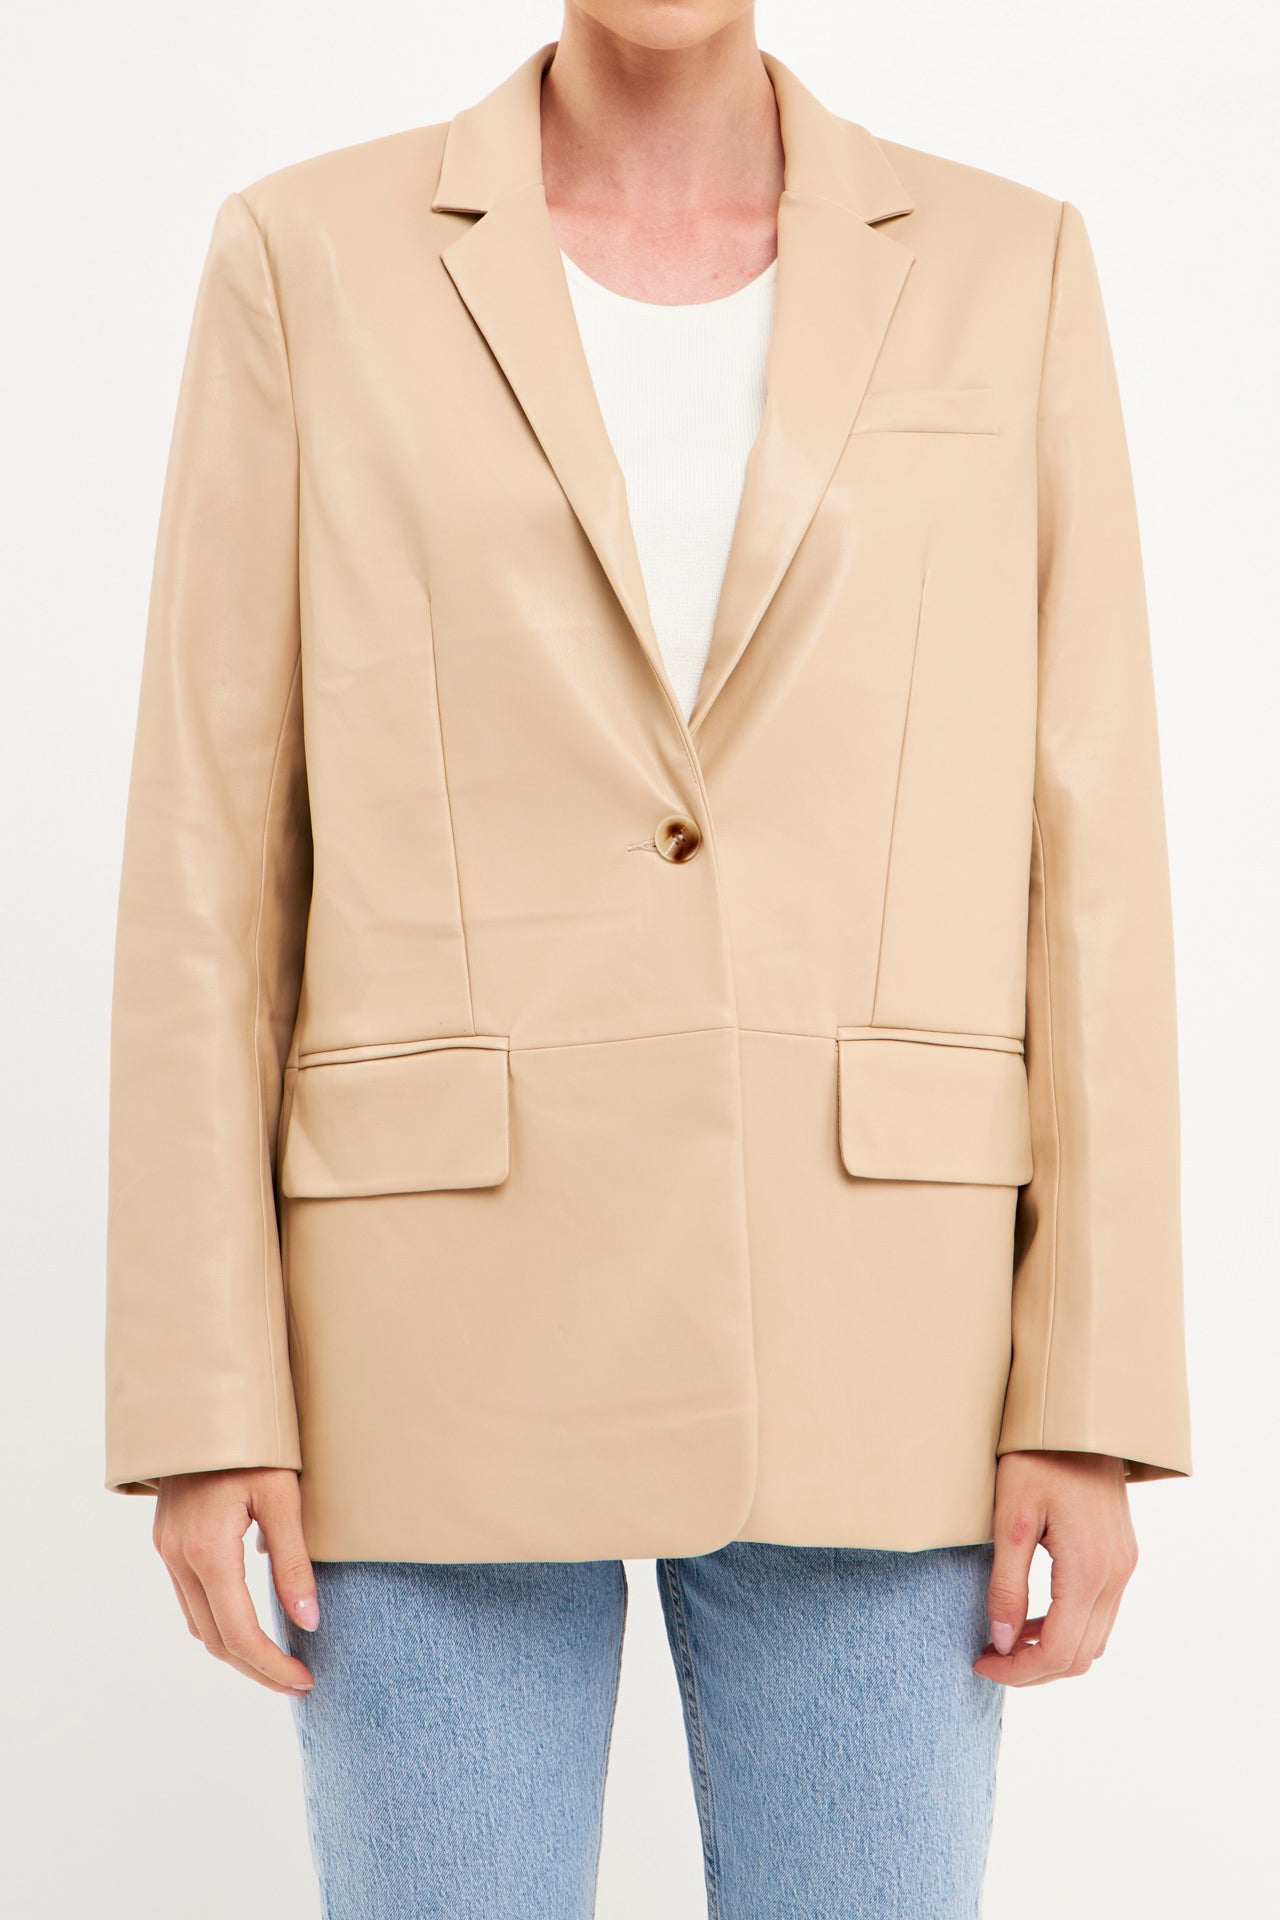 ENDLESS ROSE - Faux Leather Blazer - BLAZERS available at Objectrare